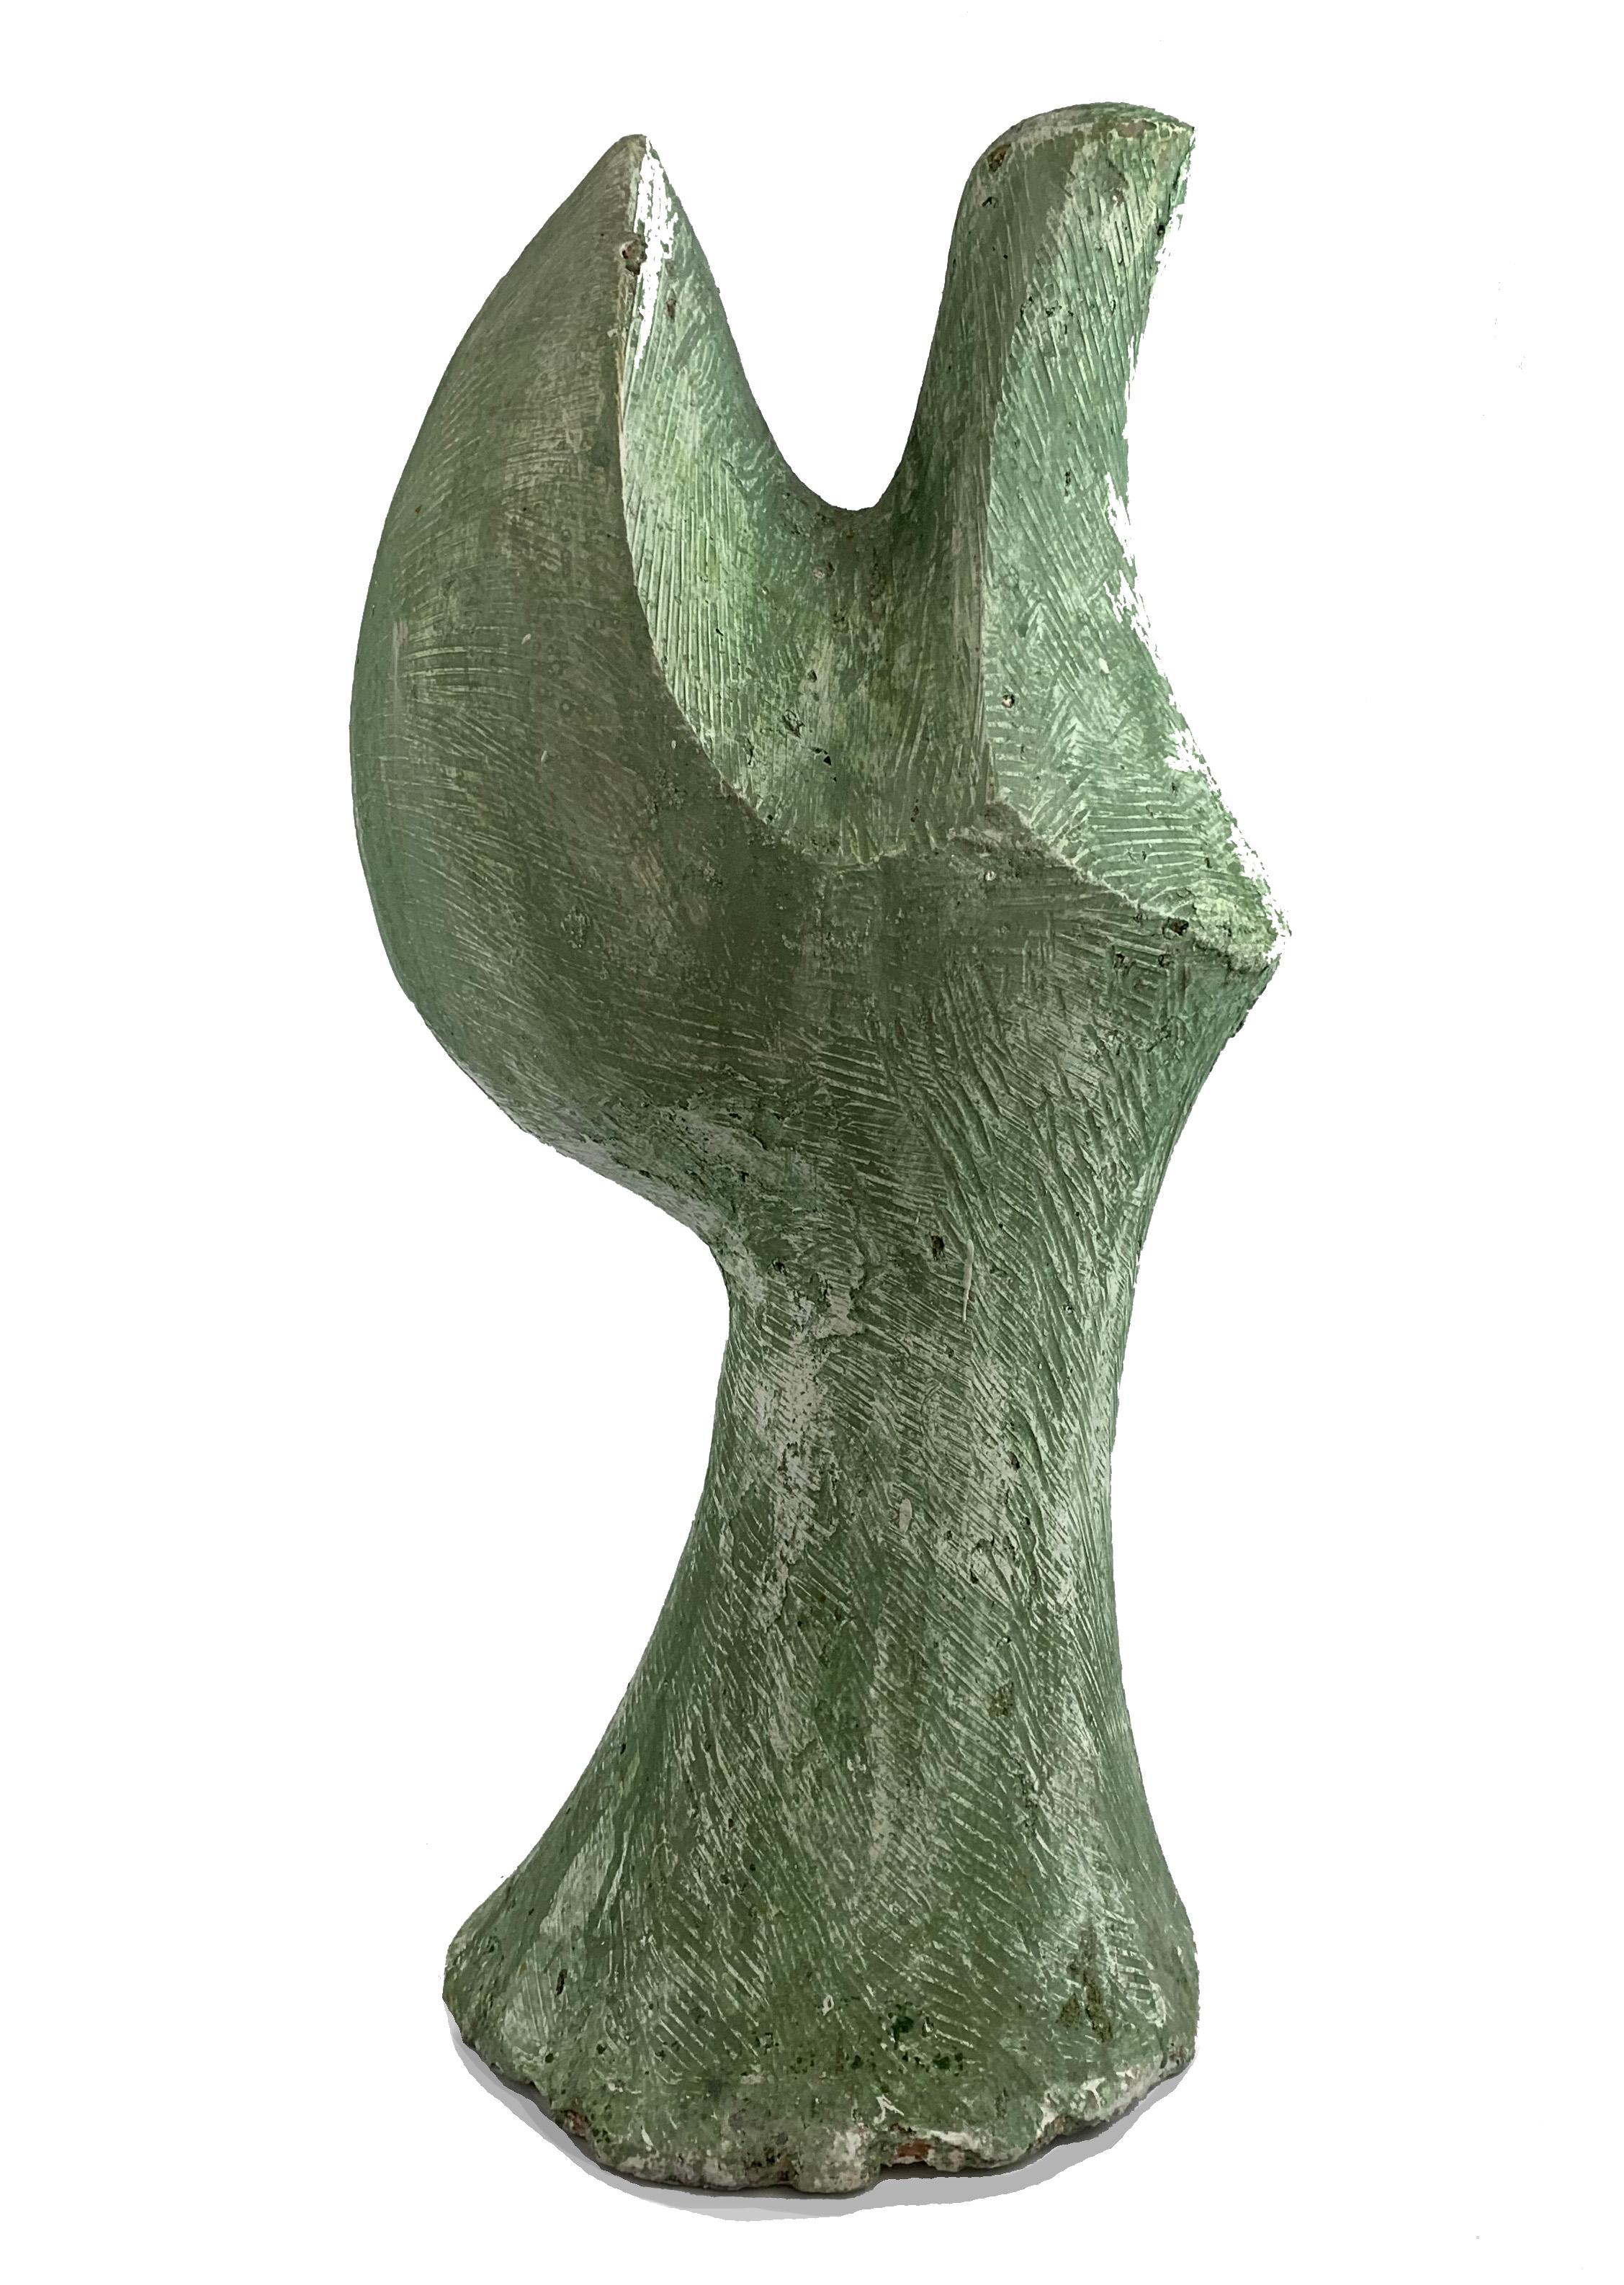 ODETTA is pleased to offer this important sculpture from the Estate of David Hayes.

David Vincent Hayes (March 15, 1931 – April 9, 2013) was an American sculptor..

These Form Studies were created as studies only for the larger scale steel